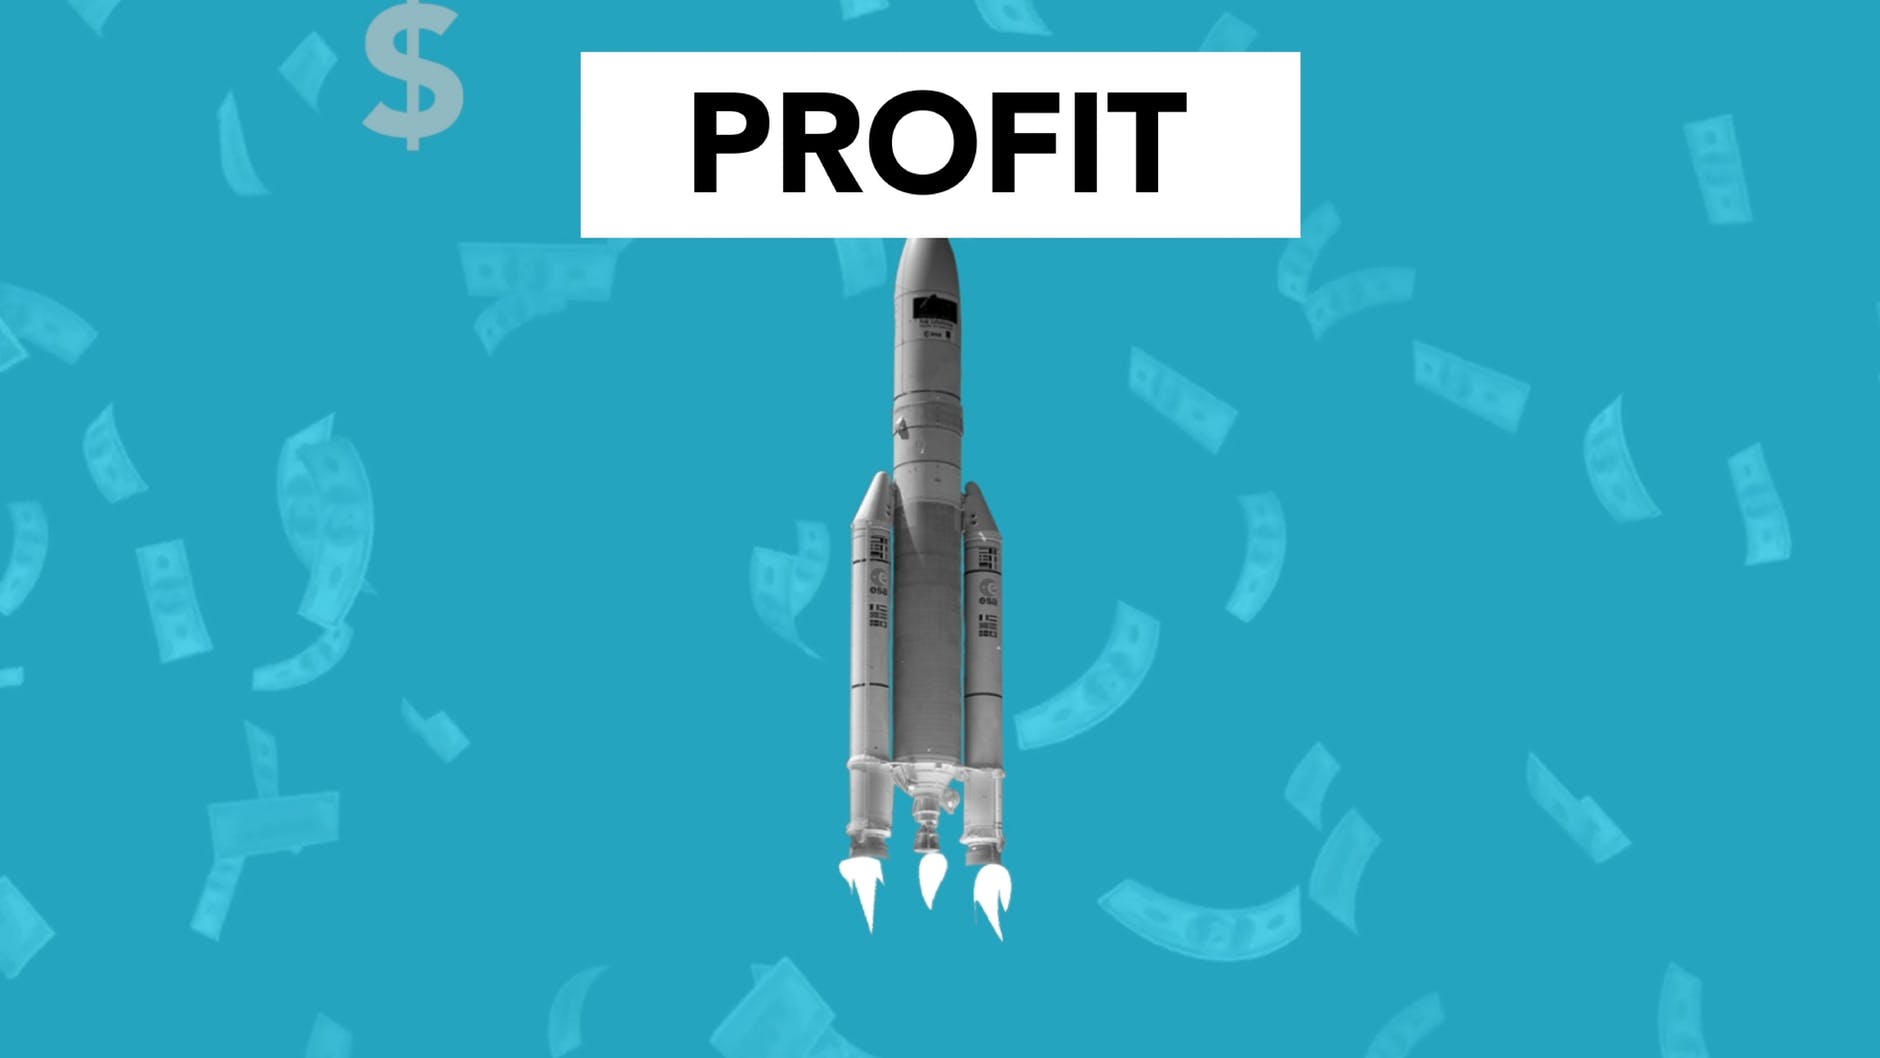 A rocket on a blue background with Profit written above